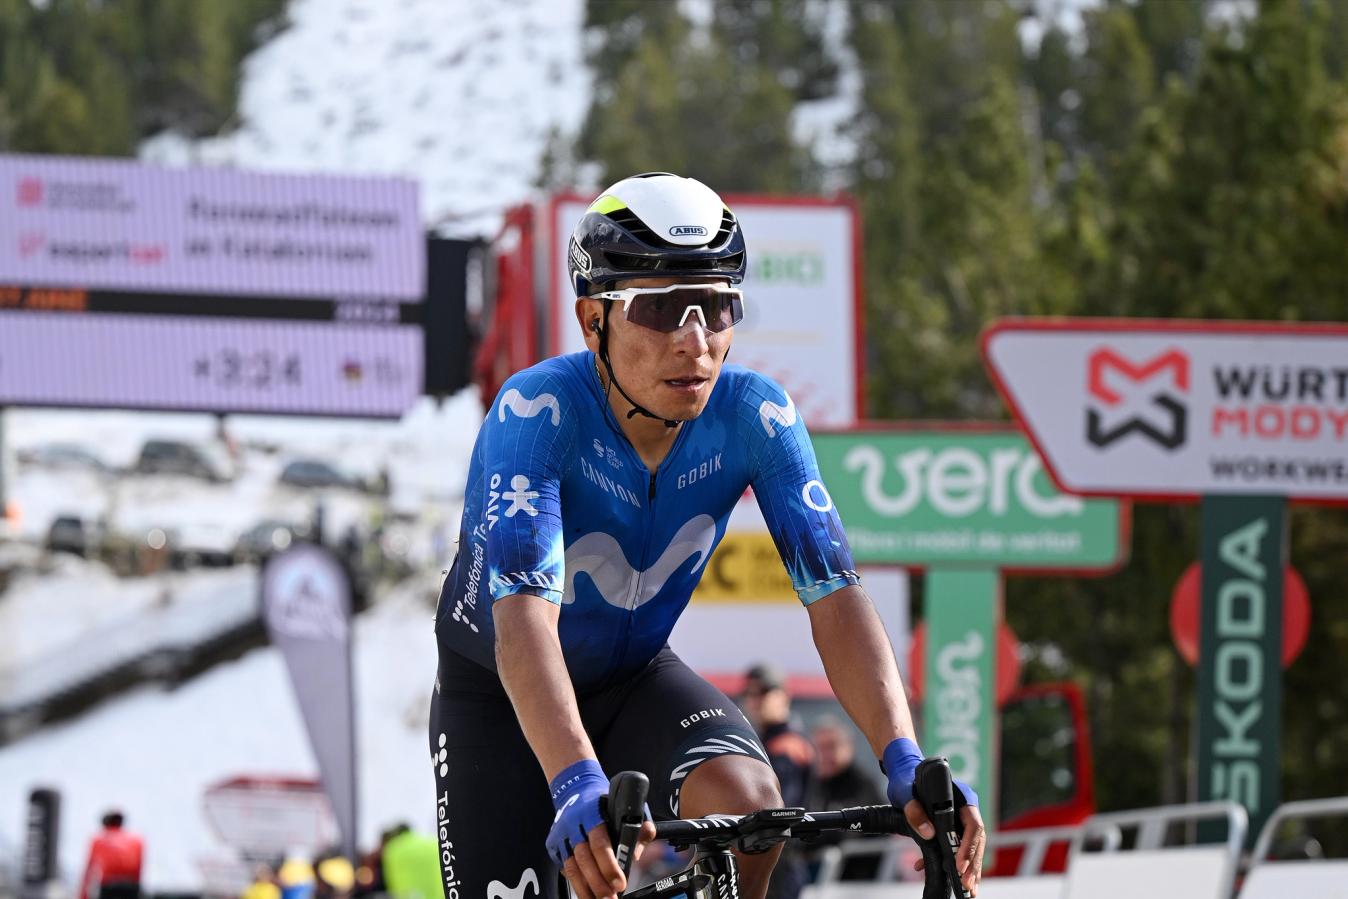 'The feeling of helplessness has been very great' after the Volta a Catalunya, admitted Quintana